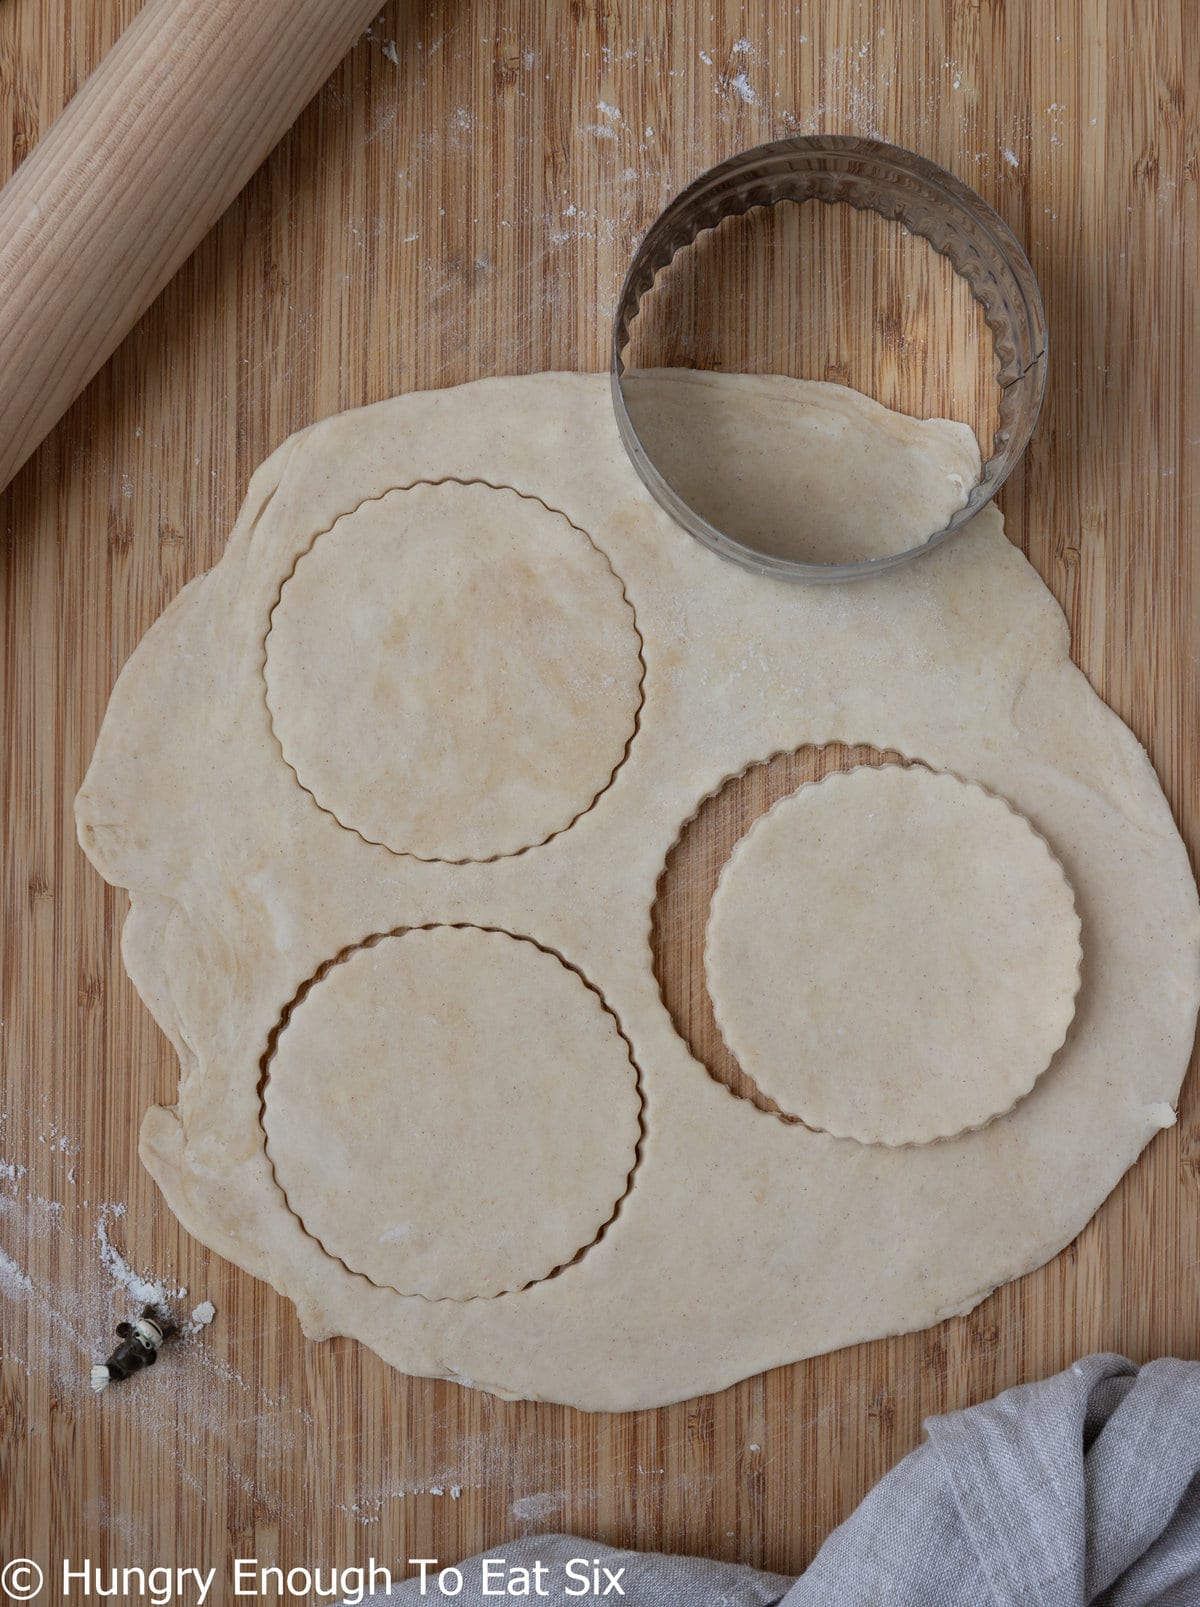 Rolled out pastry dough with circles cut out.